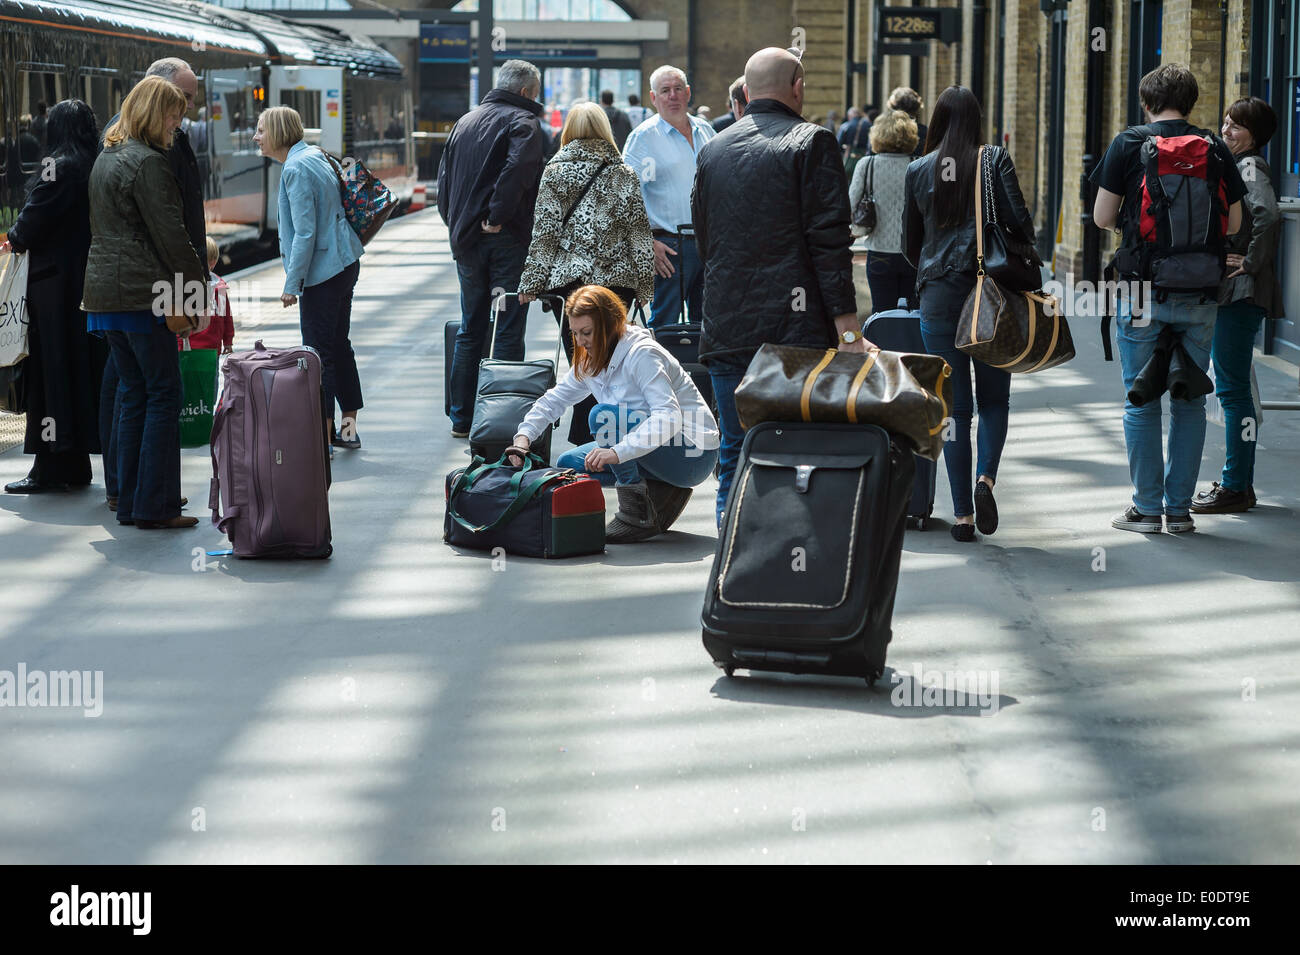 A young woman checks her bag after alighting from a train at Kings Cross Station London England Britain British English rail UK Stock Photo